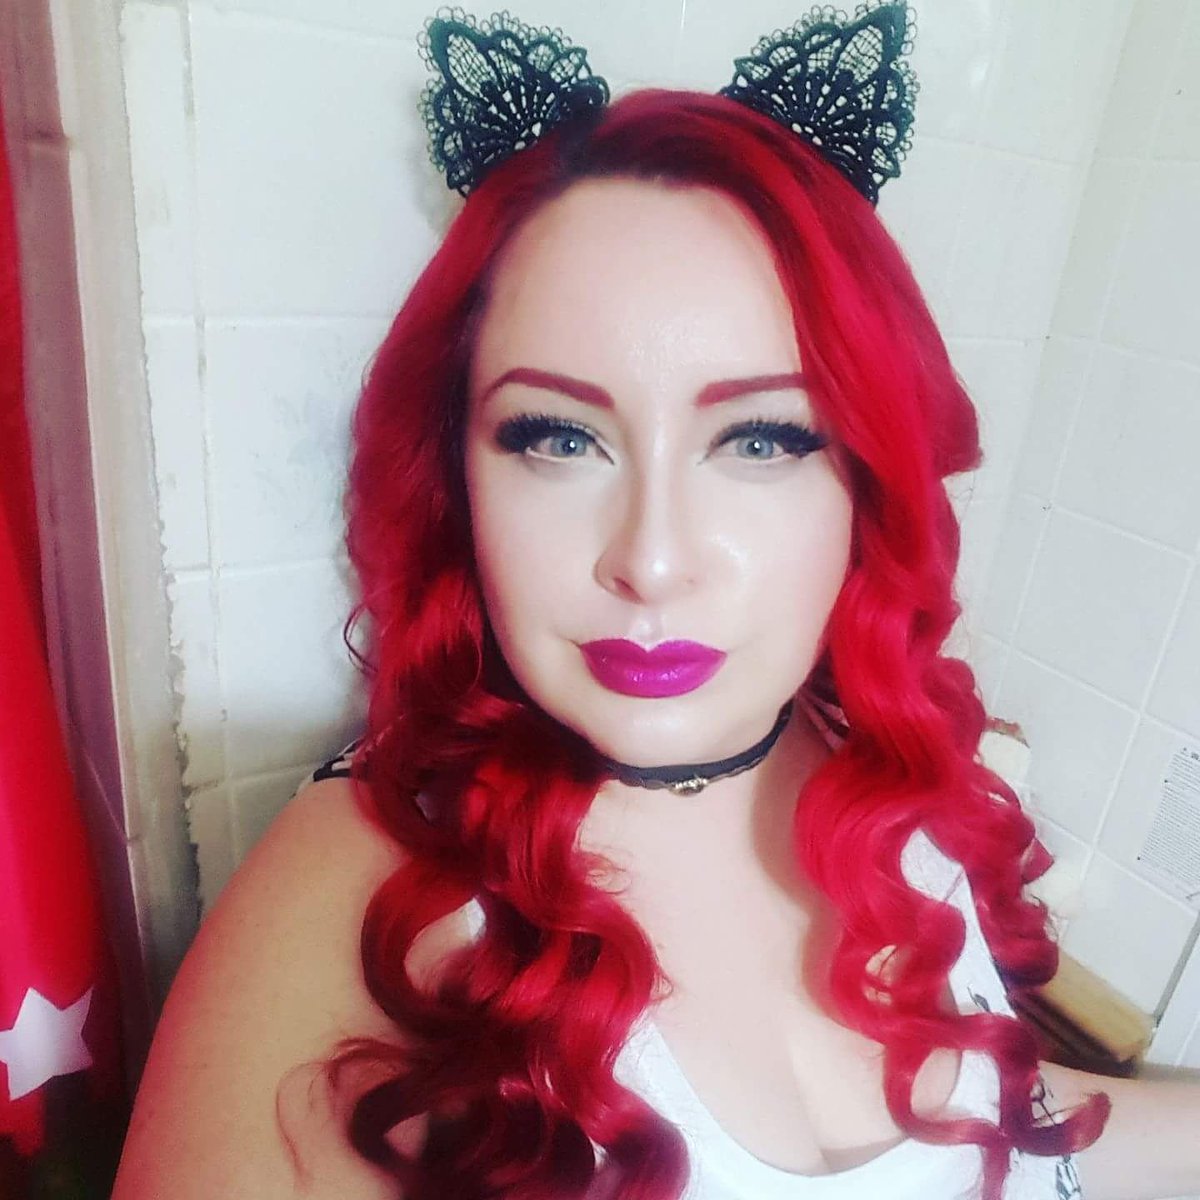 My set stream schedule will be going up this week....more costreams and a set day for The Makeup Mixer...meow 😻 #Mixer #mixerstreamer #gamergirlsunite #SupportSmallStreamers #twitch #TheMakeupMixer #streamergirl #MakeupTutorial #makeupartist #StreamerNetwork #teamfareeldoe